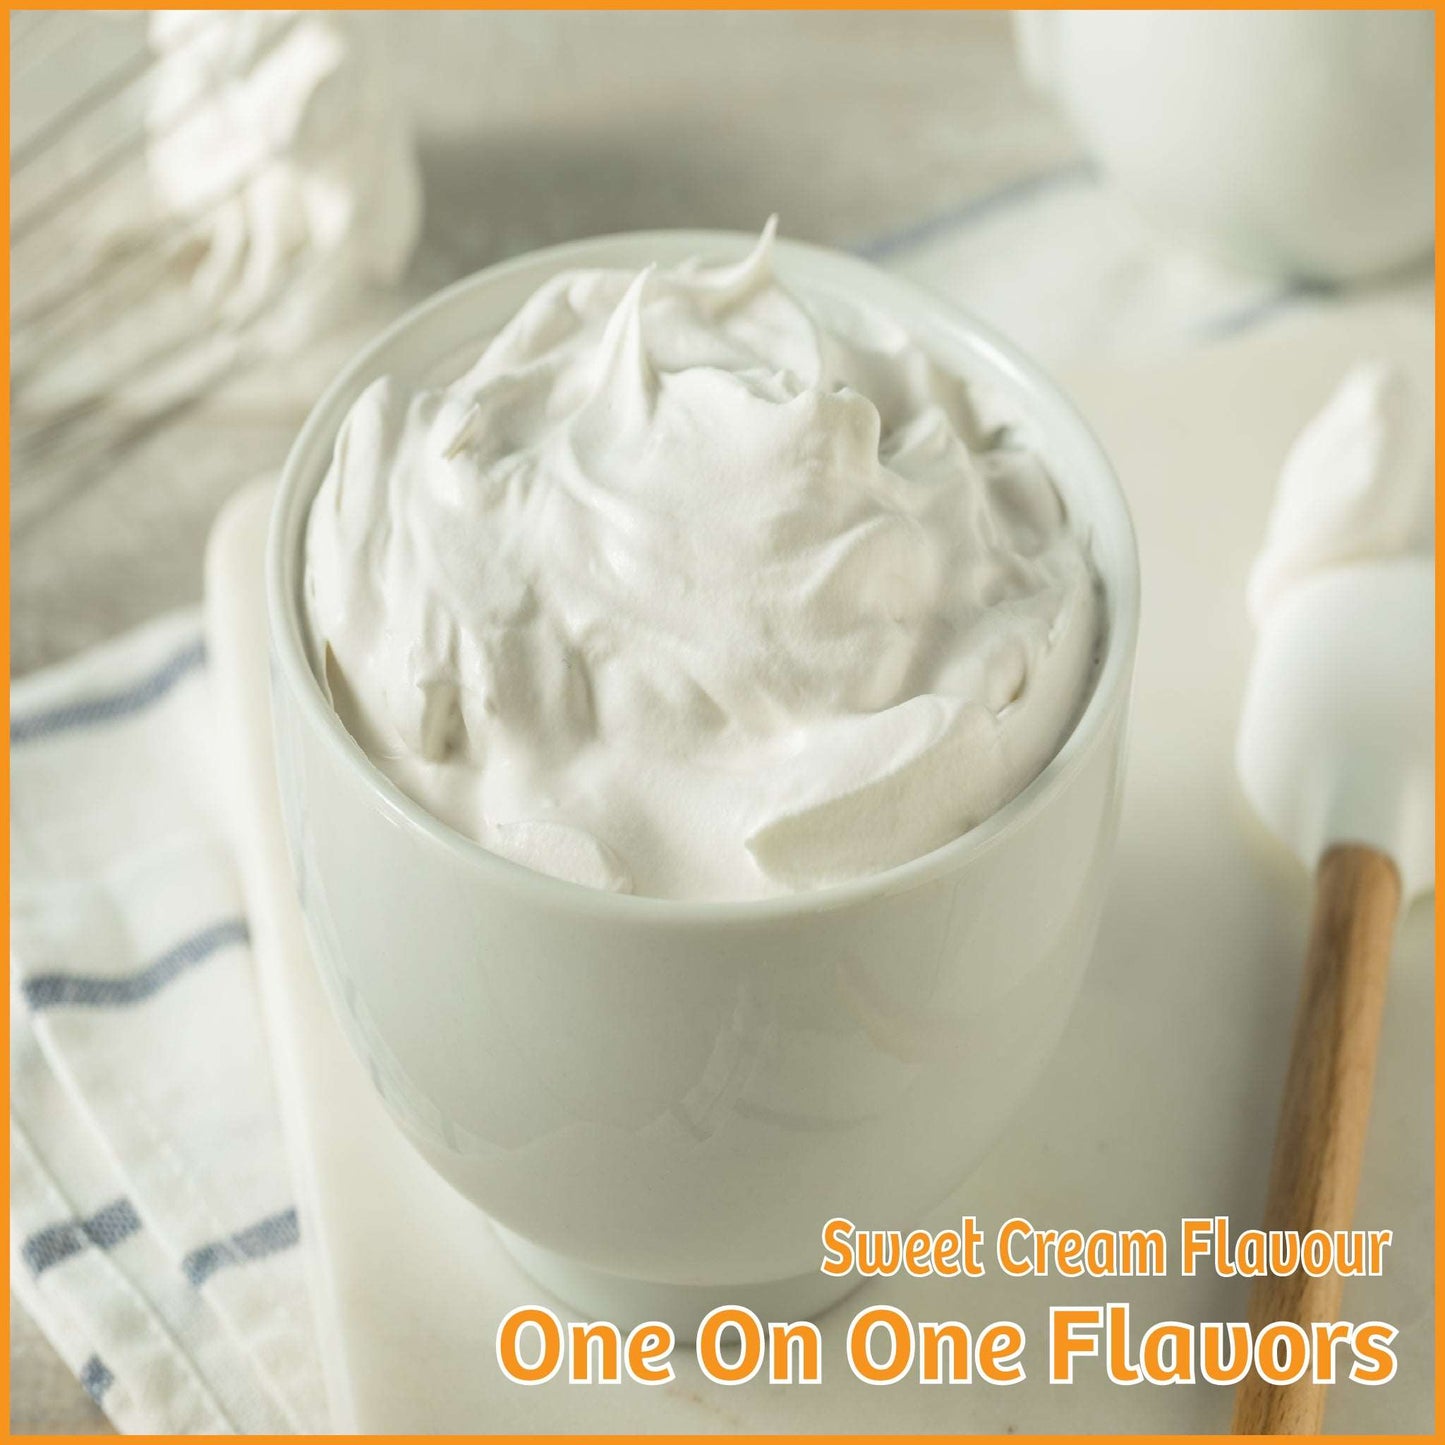 Sweet Cream Flavour- One On One Flavors - Flavour Fog - Canada's flavour depot.